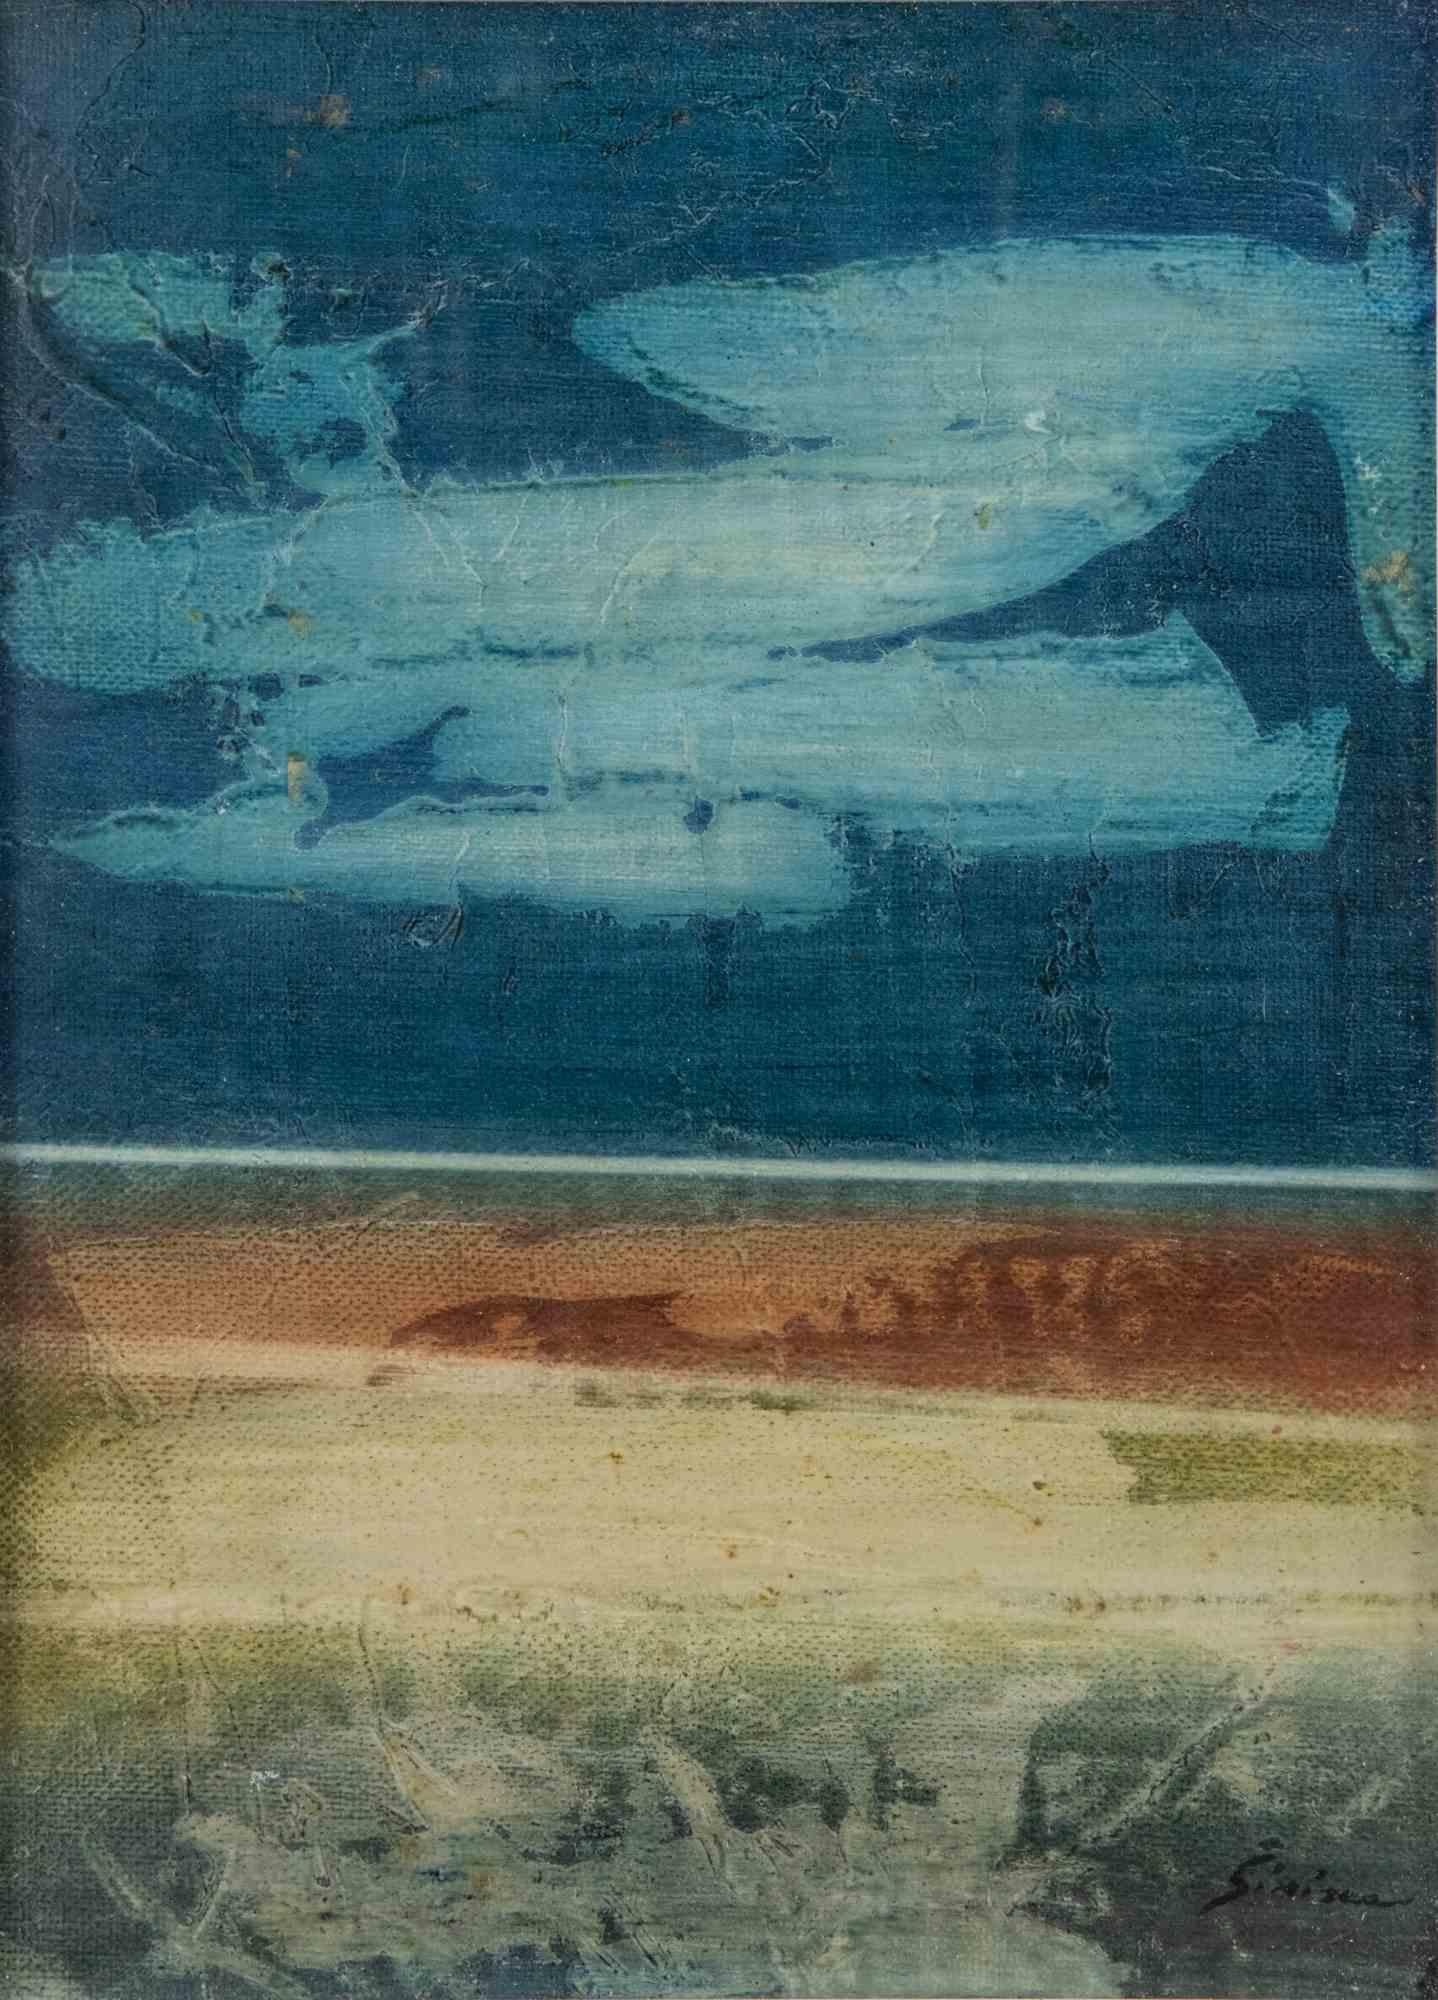 Blue Horizon is a mixed media on canvas realized by Mario Sinisca (Naples, 1929), an Italian post-war master that cannot be labeled in any artistic movement.

Signed on the lower right margin.

This a superb original painting exalting the sign and